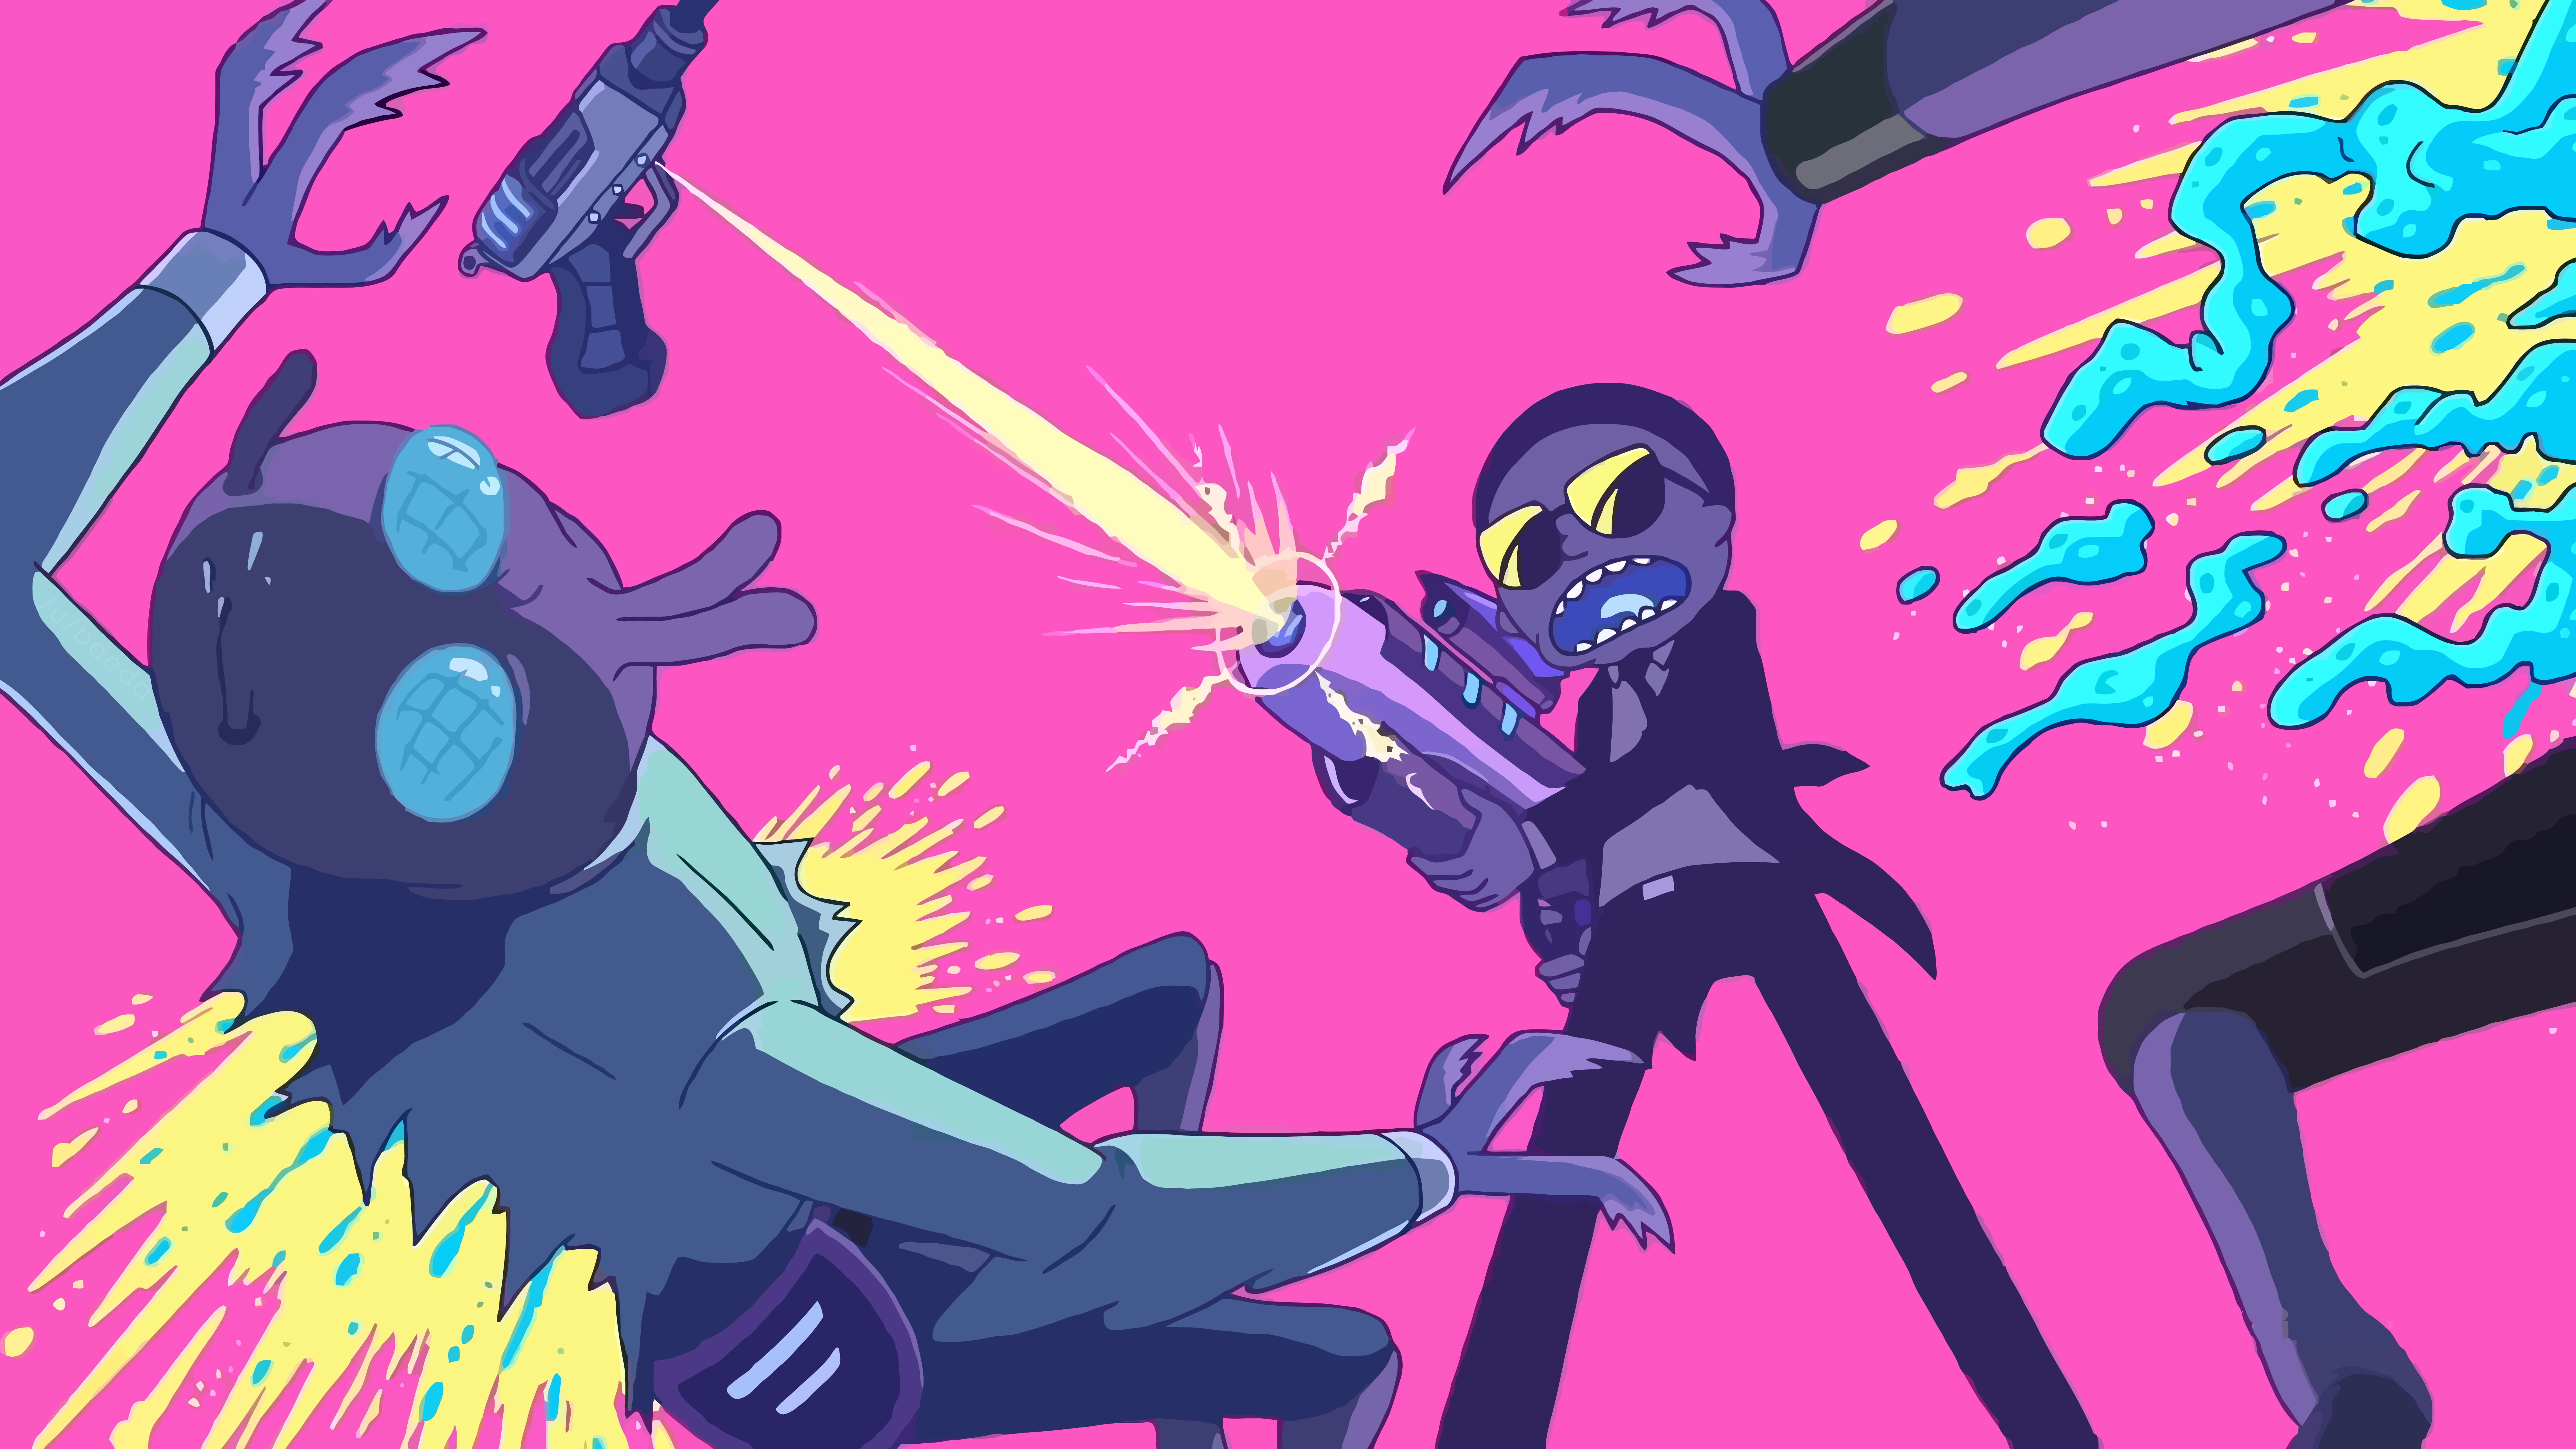 cartoon character holding rifle wallpaper, Rick and Morty, Run the Jewels